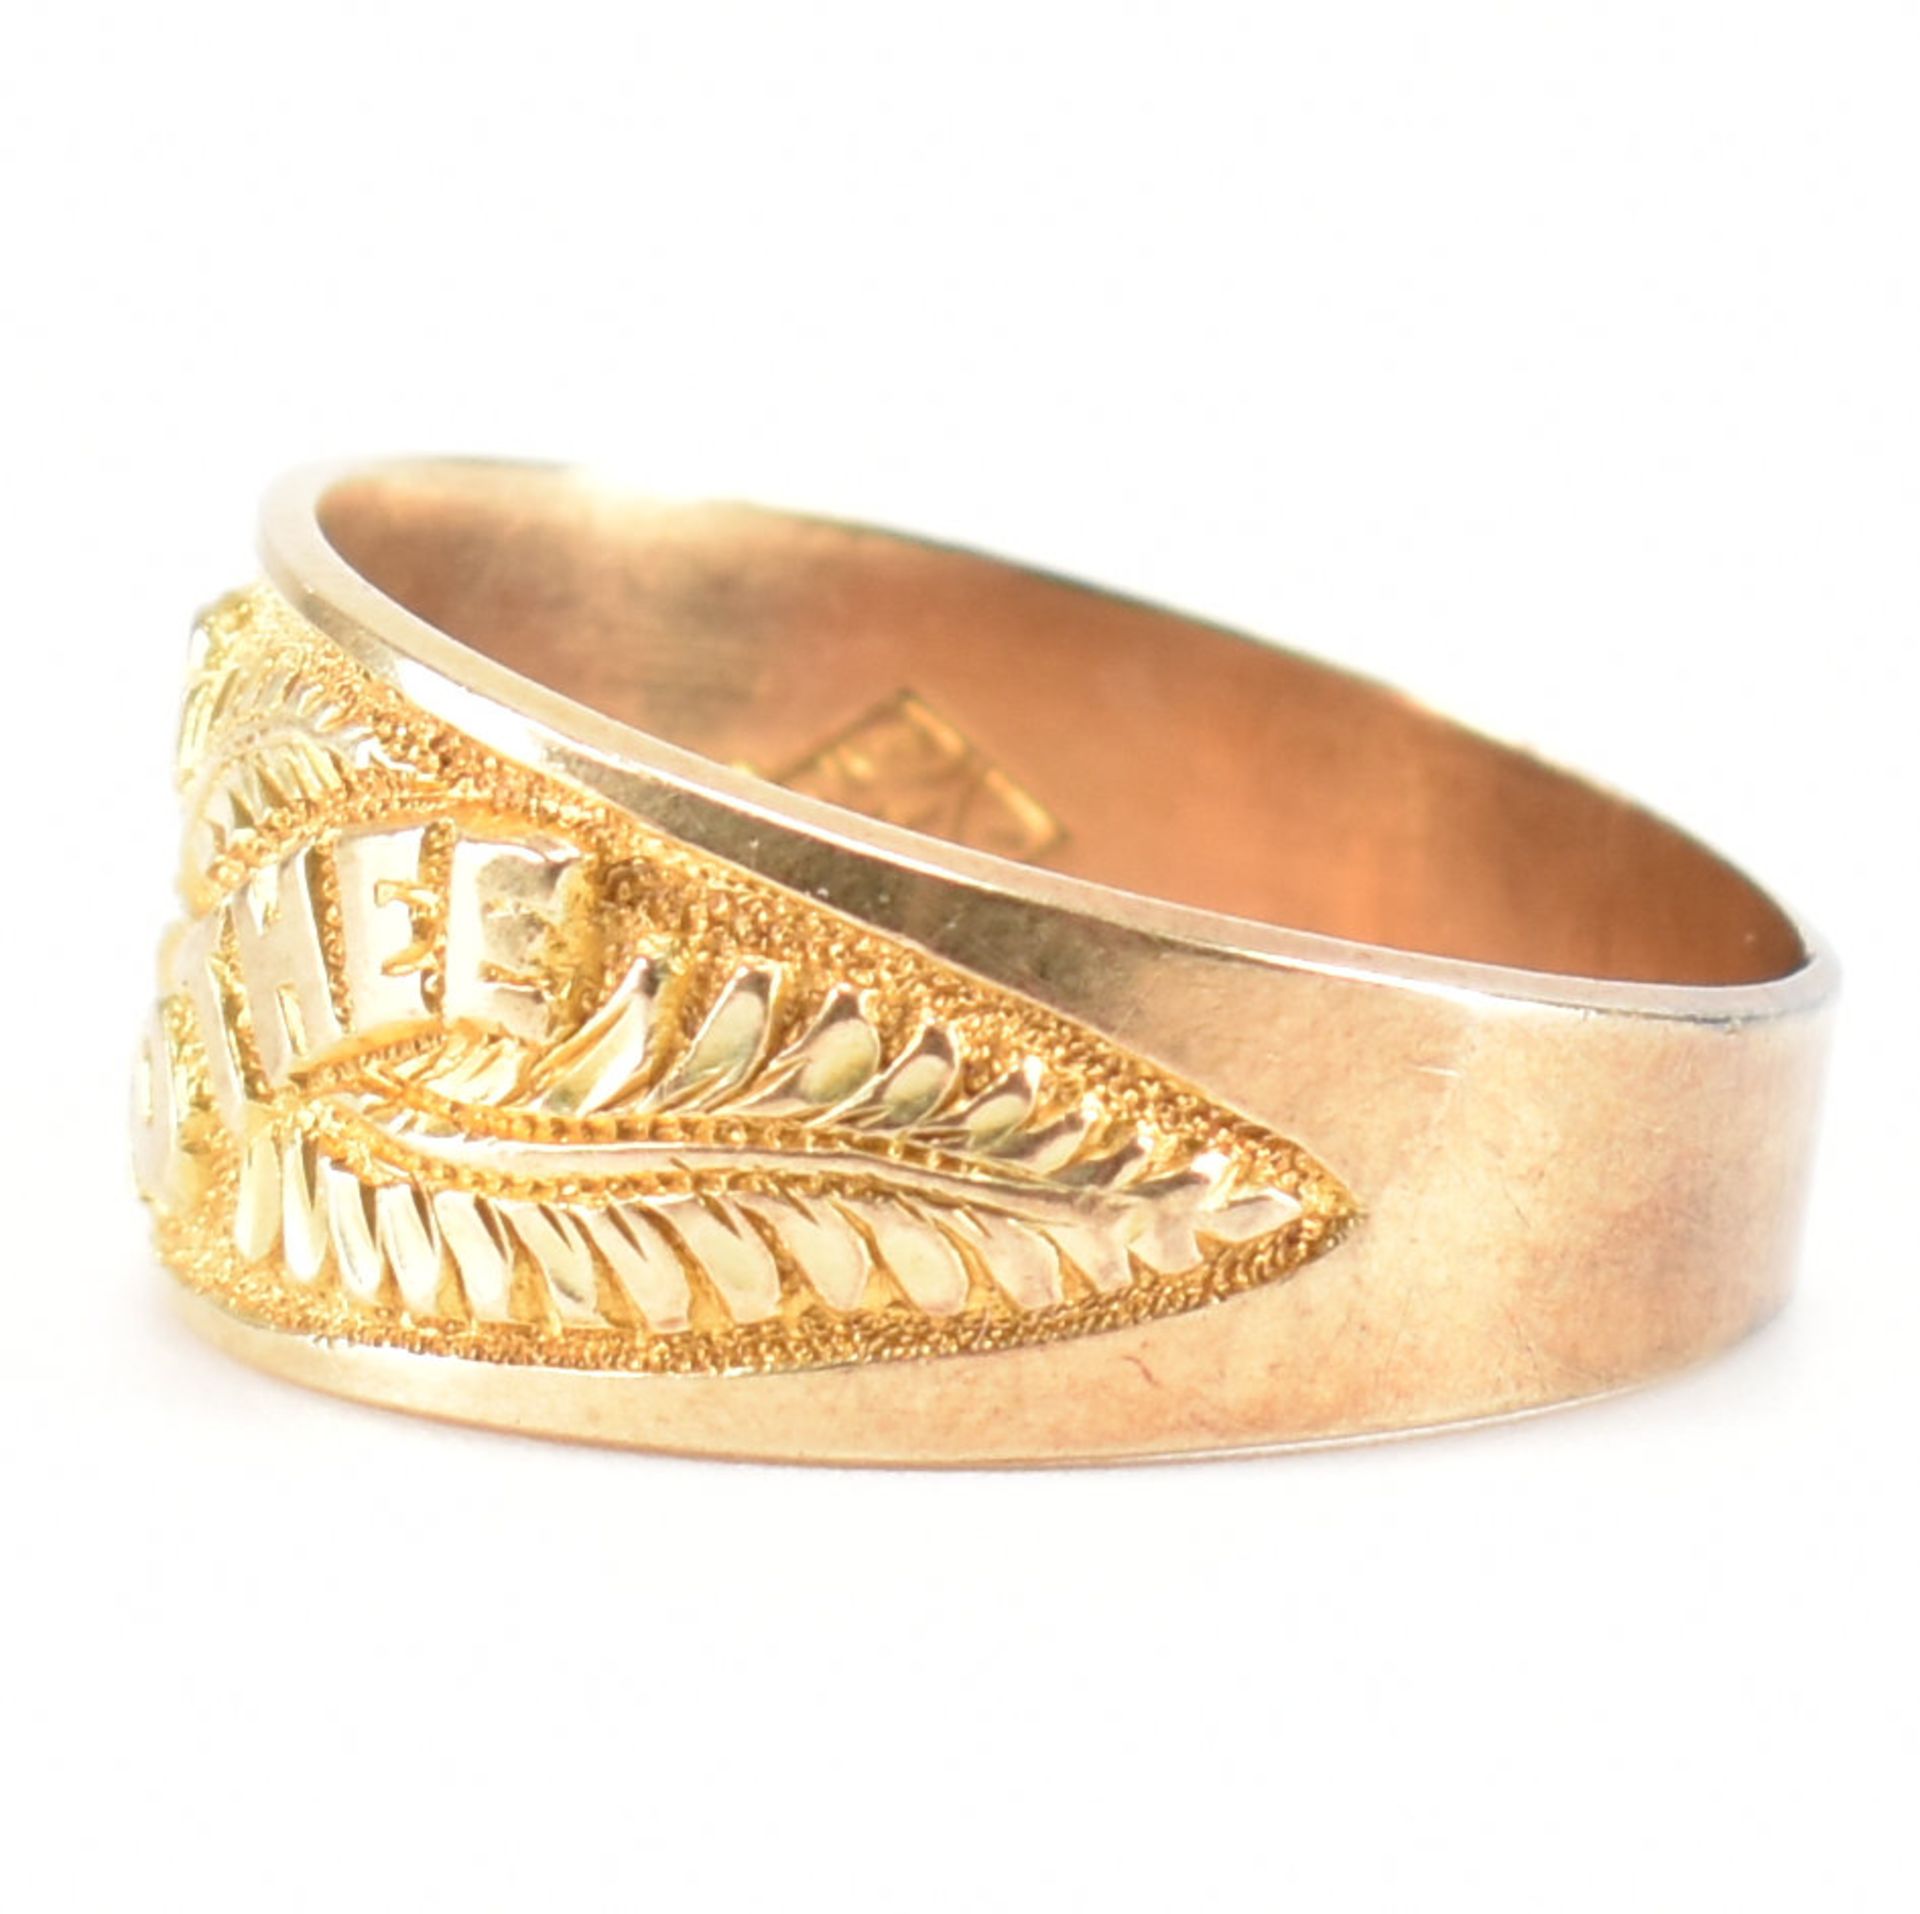 HALLMARKED VICTORIAN 9CT GOLD ETCHED BAND RING - Image 2 of 8